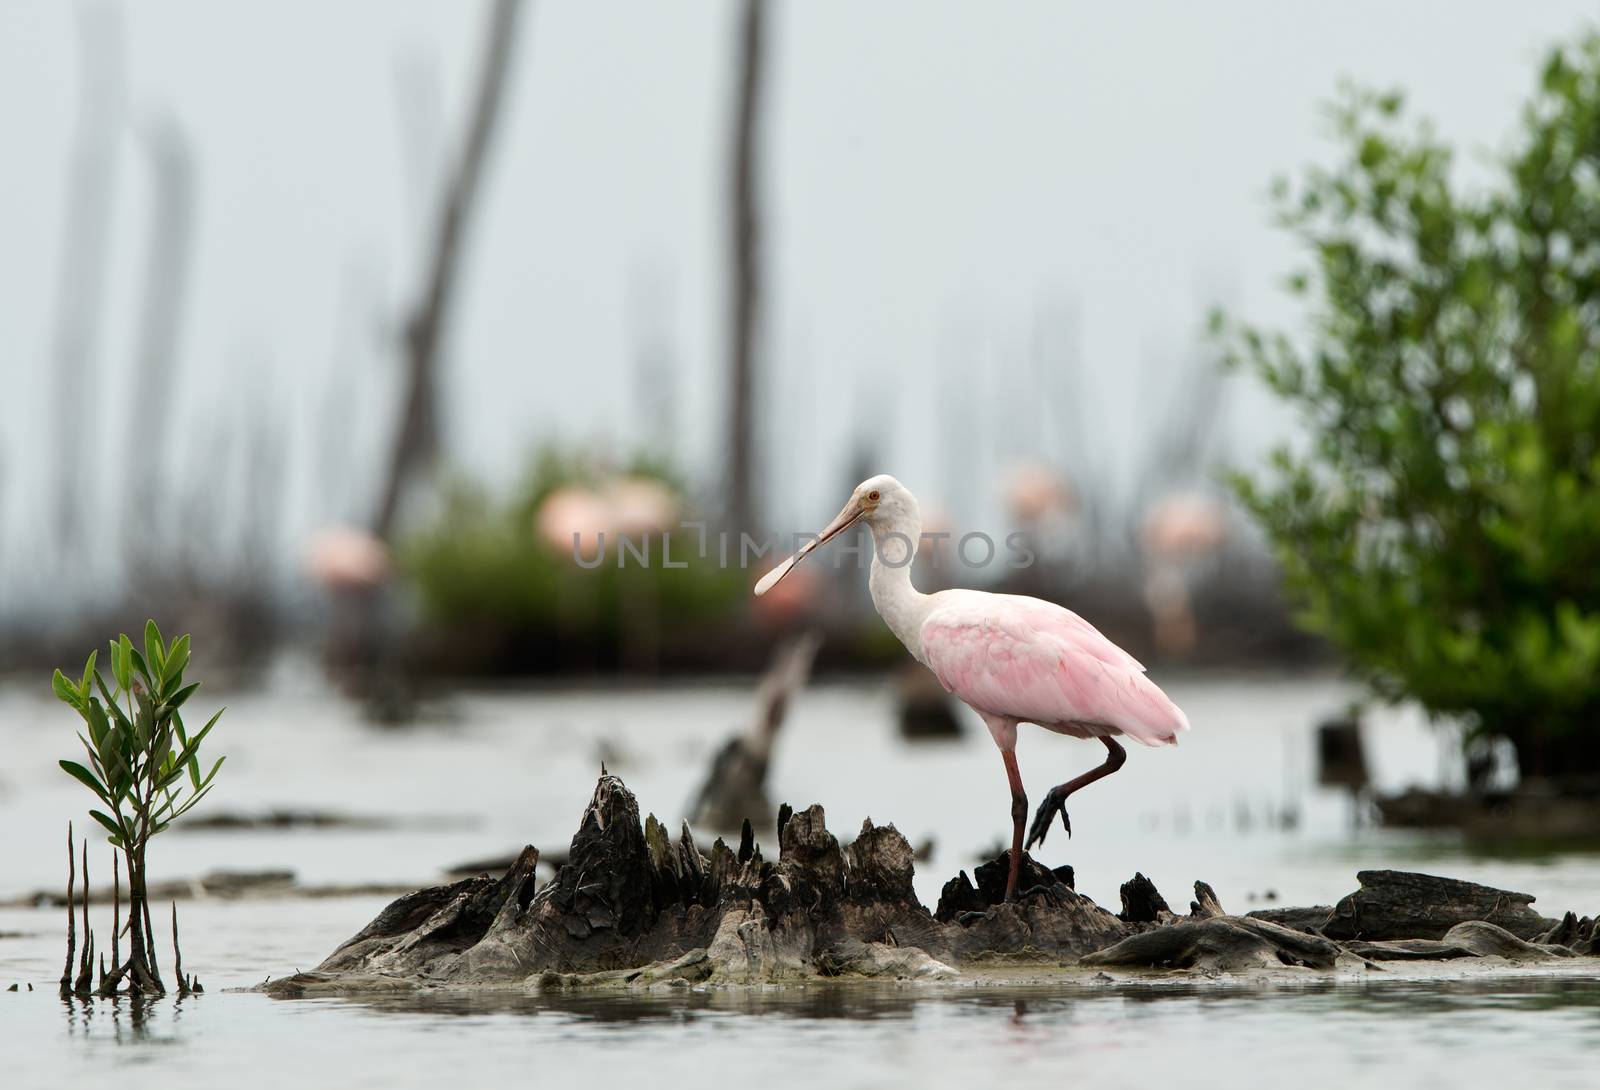 The Roseate Spoonbils by SURZ